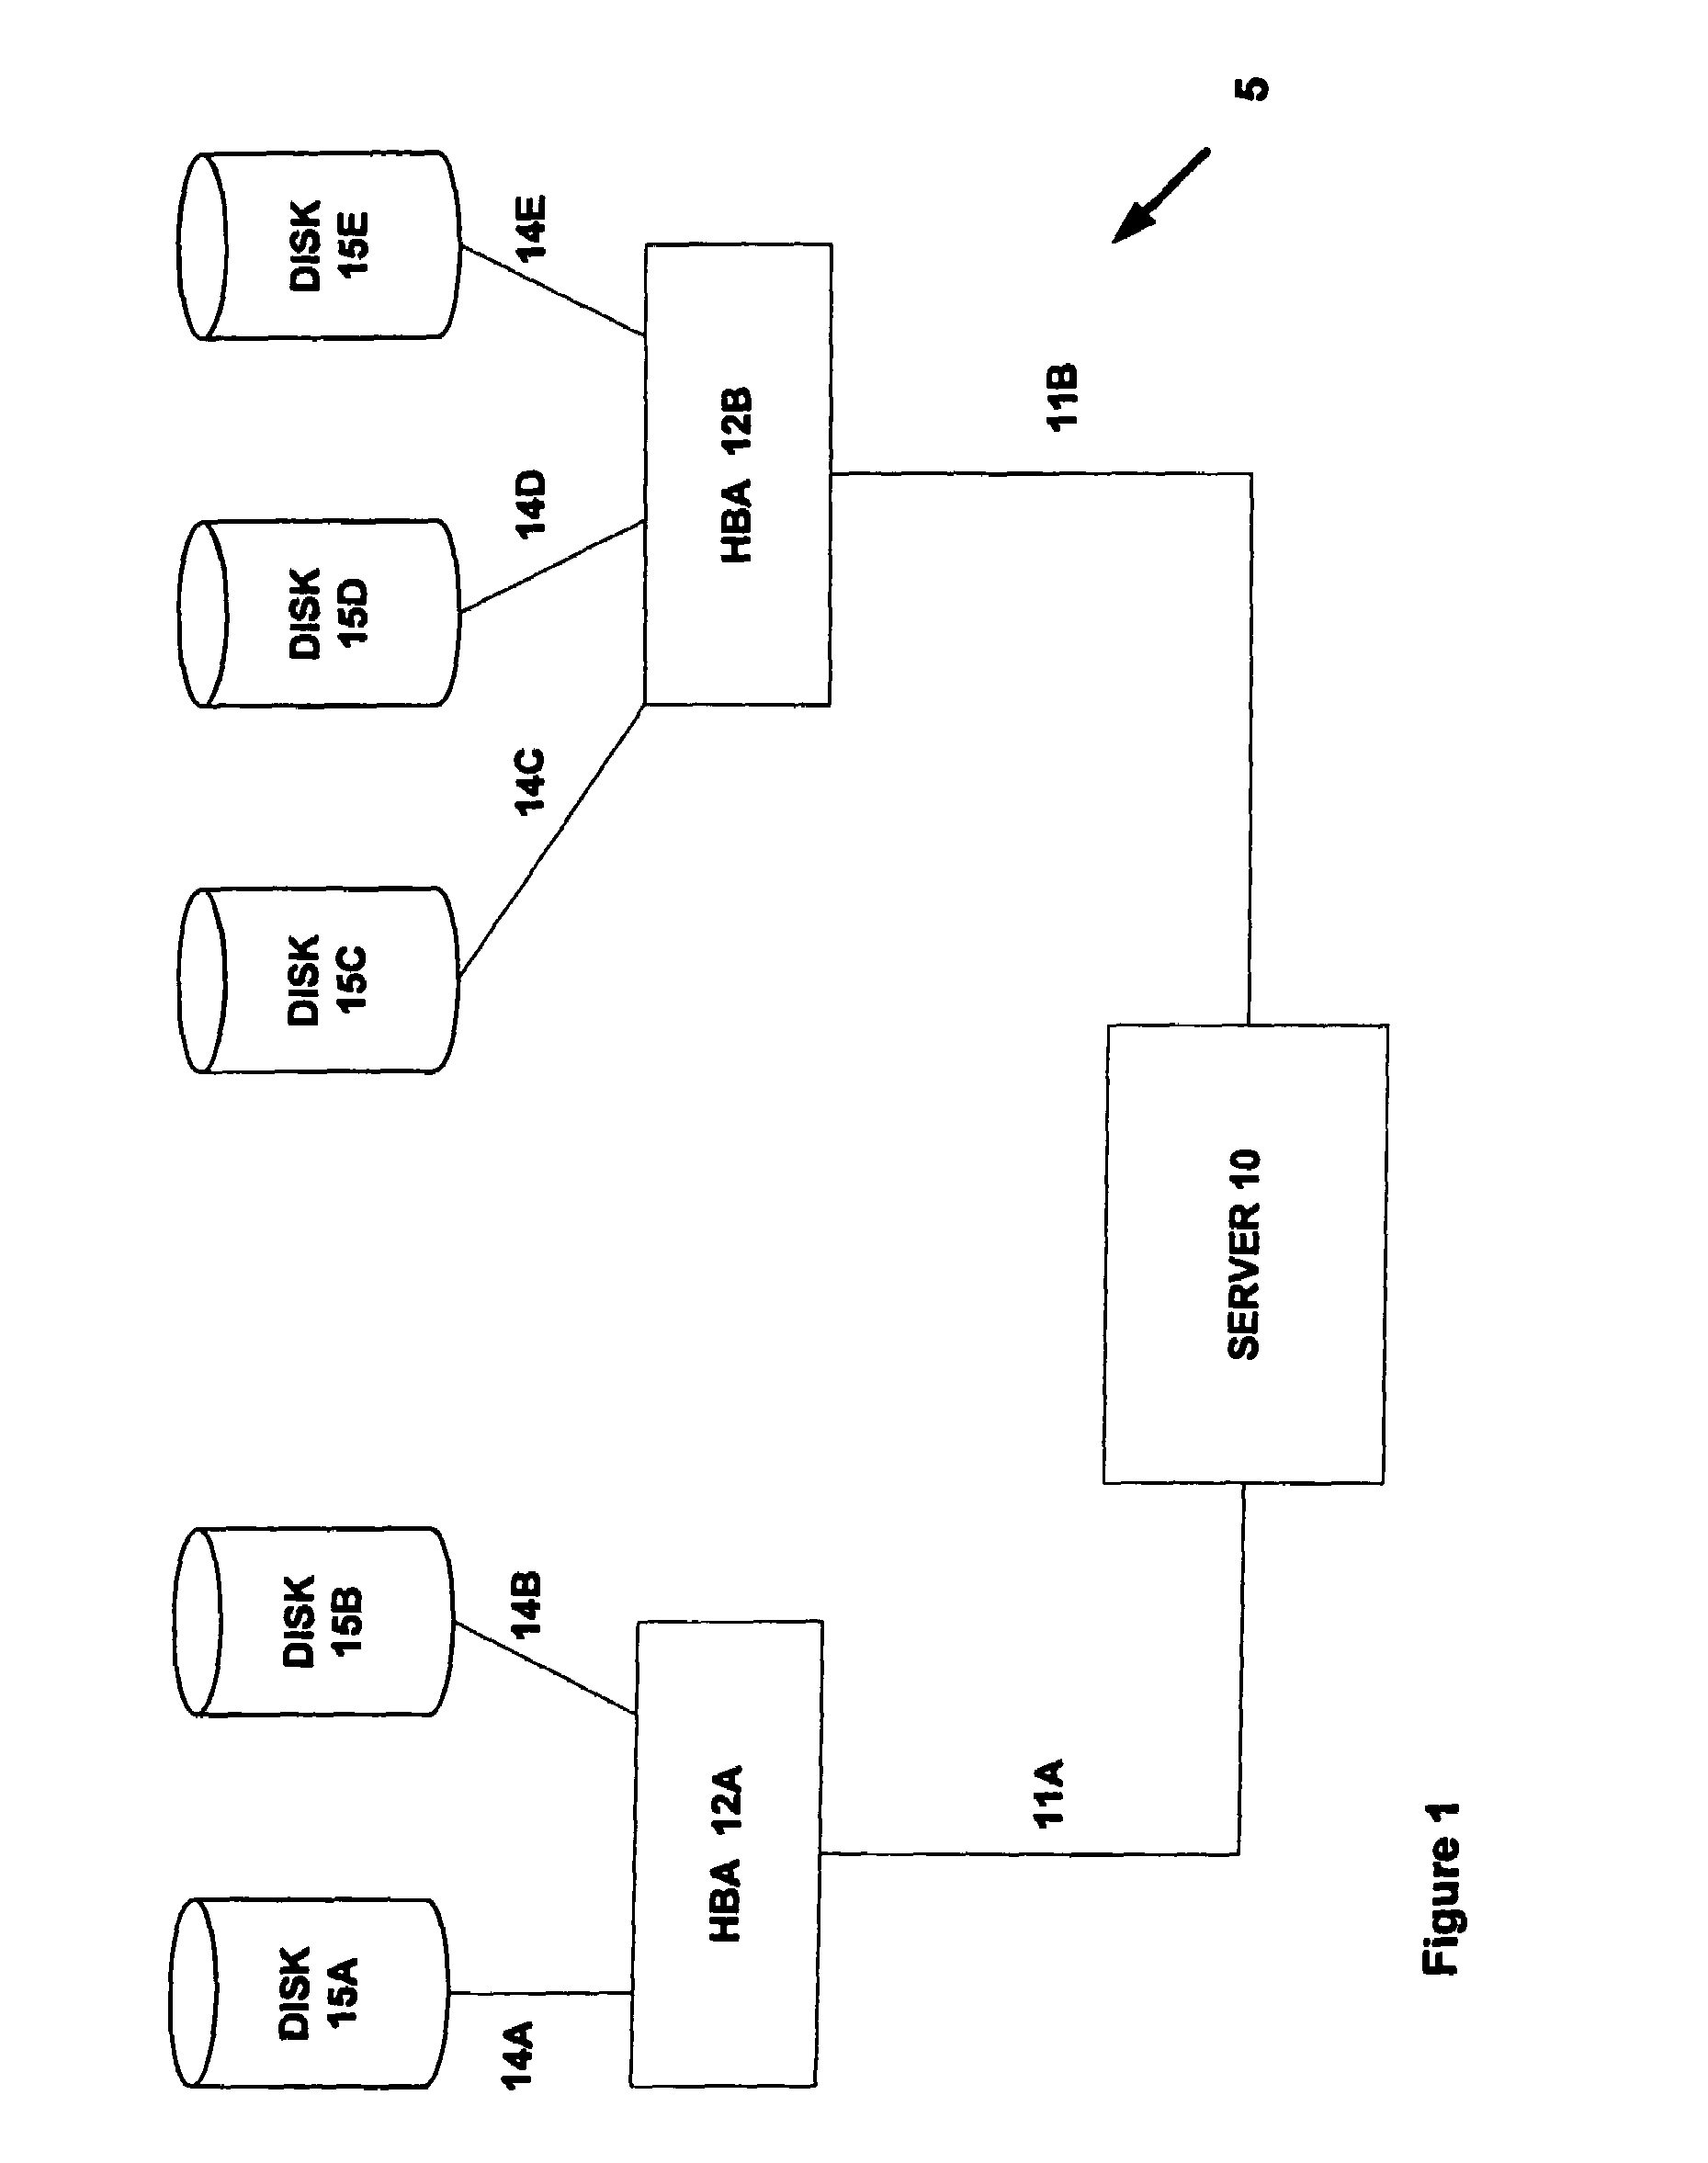 Method, apparatus and computer program product for simulating a storage configuration for a computer system